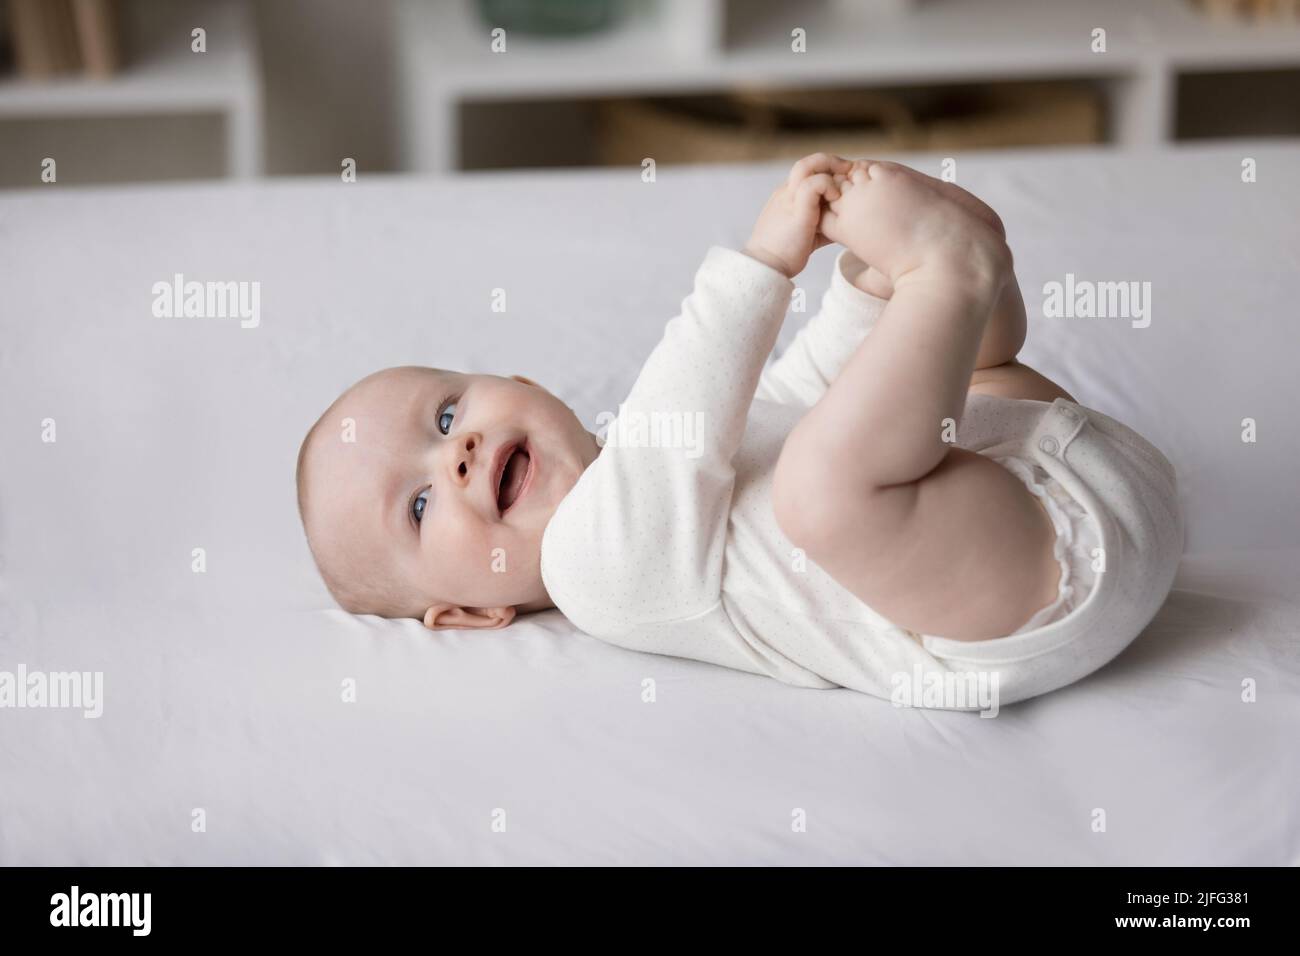 Smiling baby in bodysuit and diaper lying on bed, closeup Stock Photo